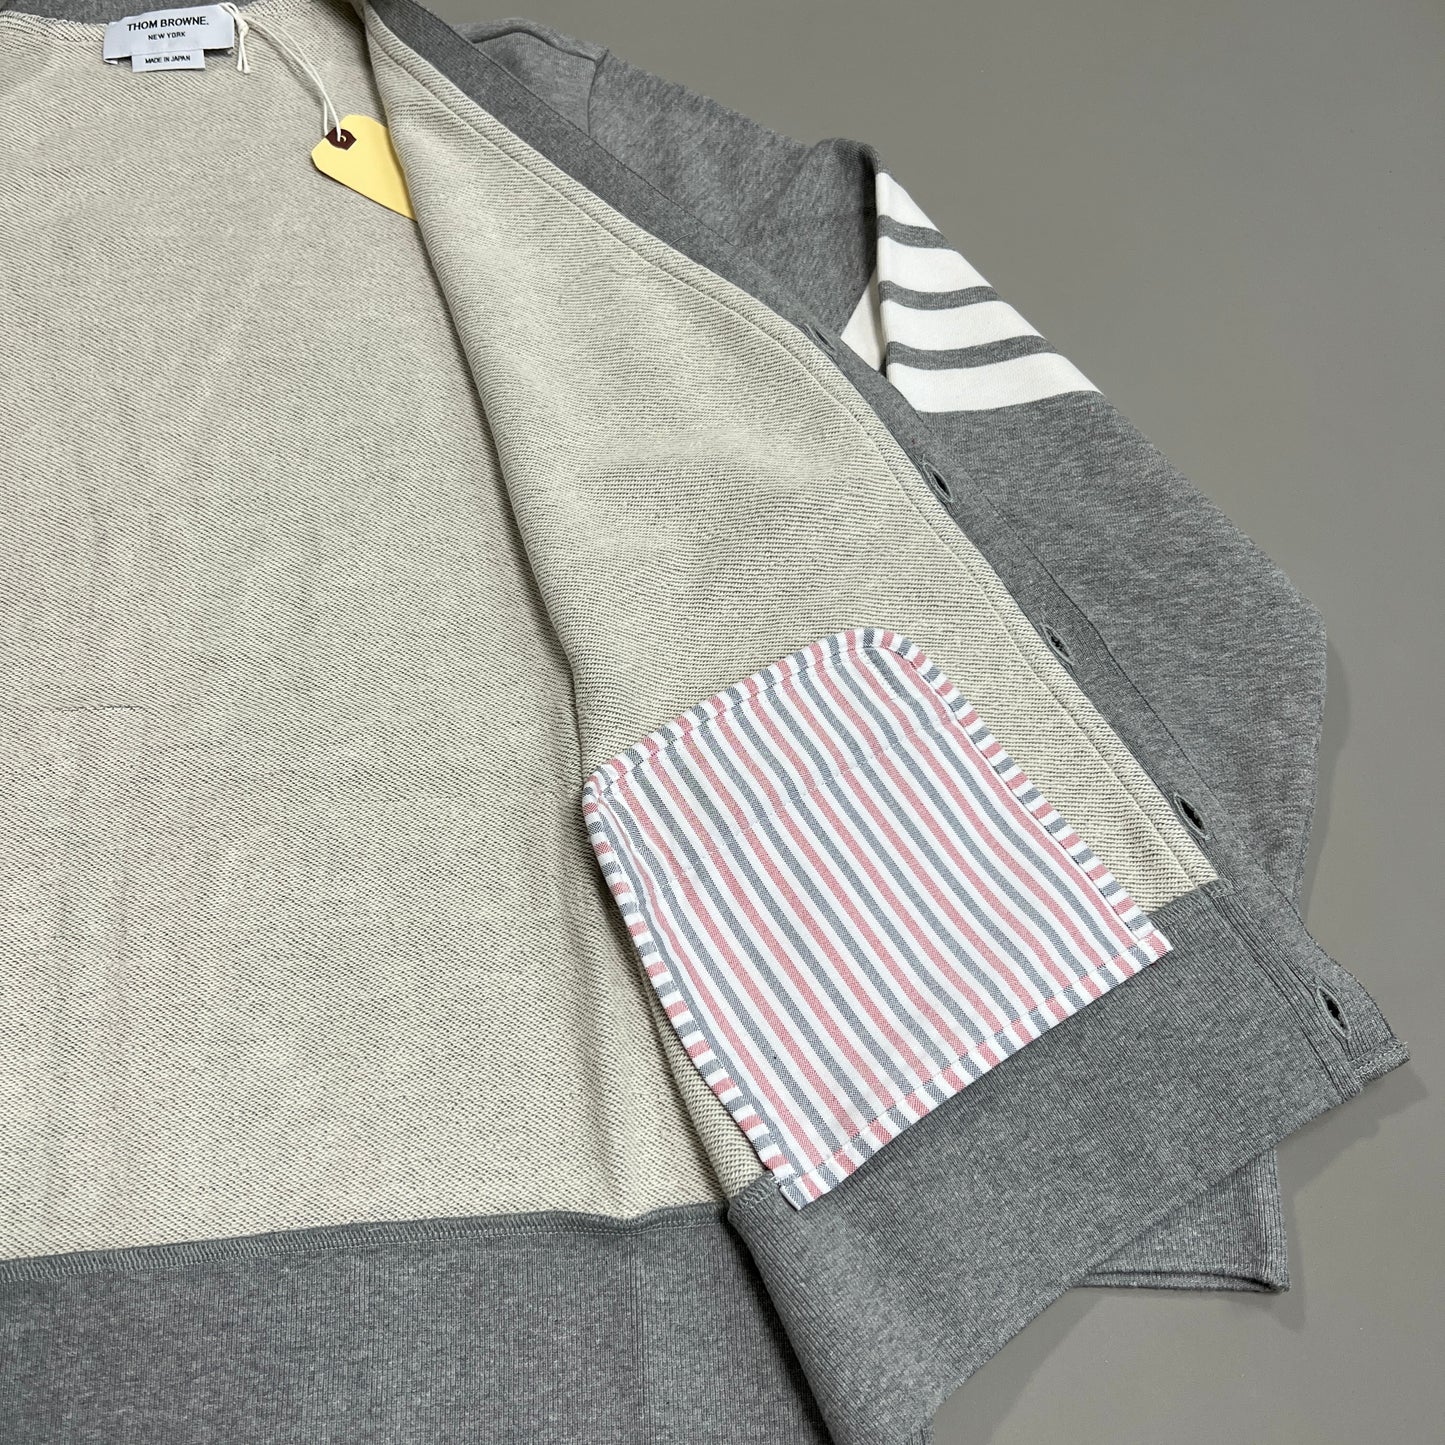 THOM BROWNE V-NECK Cardigan w/ 4Bar in Jersey Loopback Light Grey Size 4 (New)